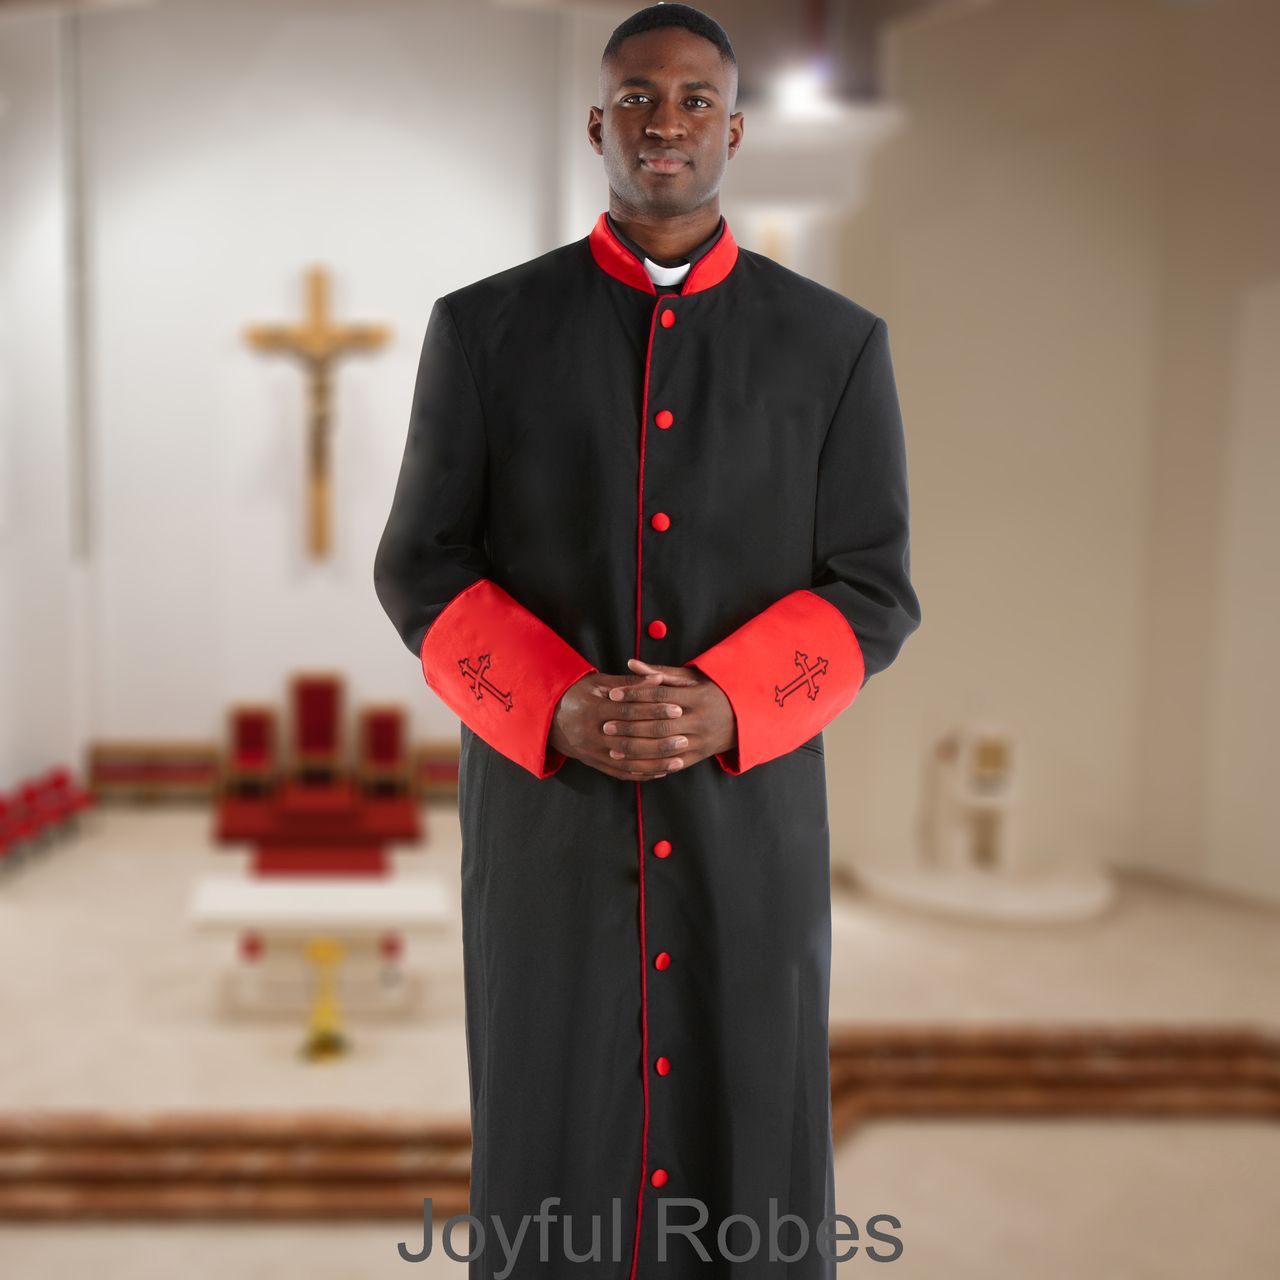 https://suitavenue.com/pub/media/catalog/product/cache/926507dc7f93631a094422215b778fe0/M/e/Mens_Black_and_Red_Clergy_Robe_Cassock_with_Satin_Cuffs_2__30562.jpg